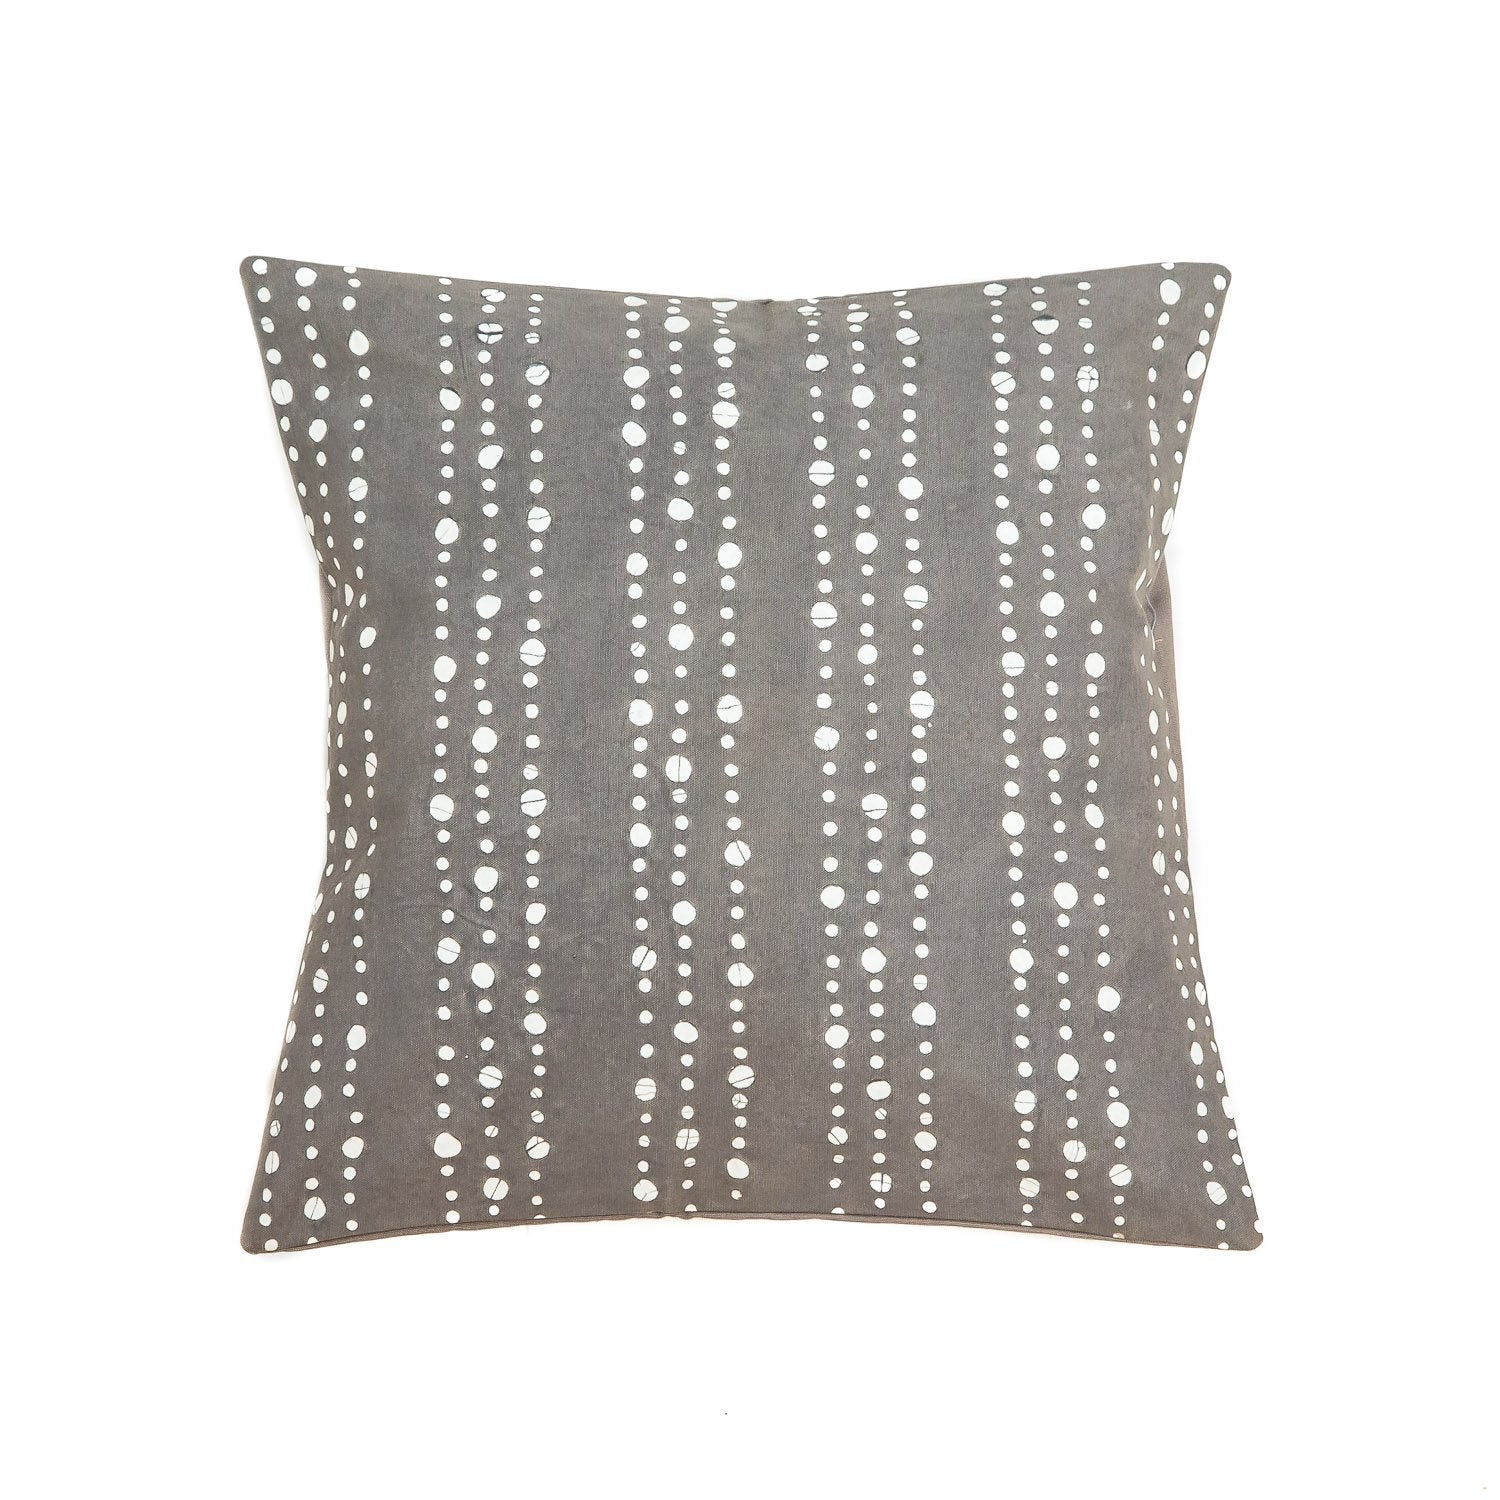 Throw Pillow with dots in dark grey colours